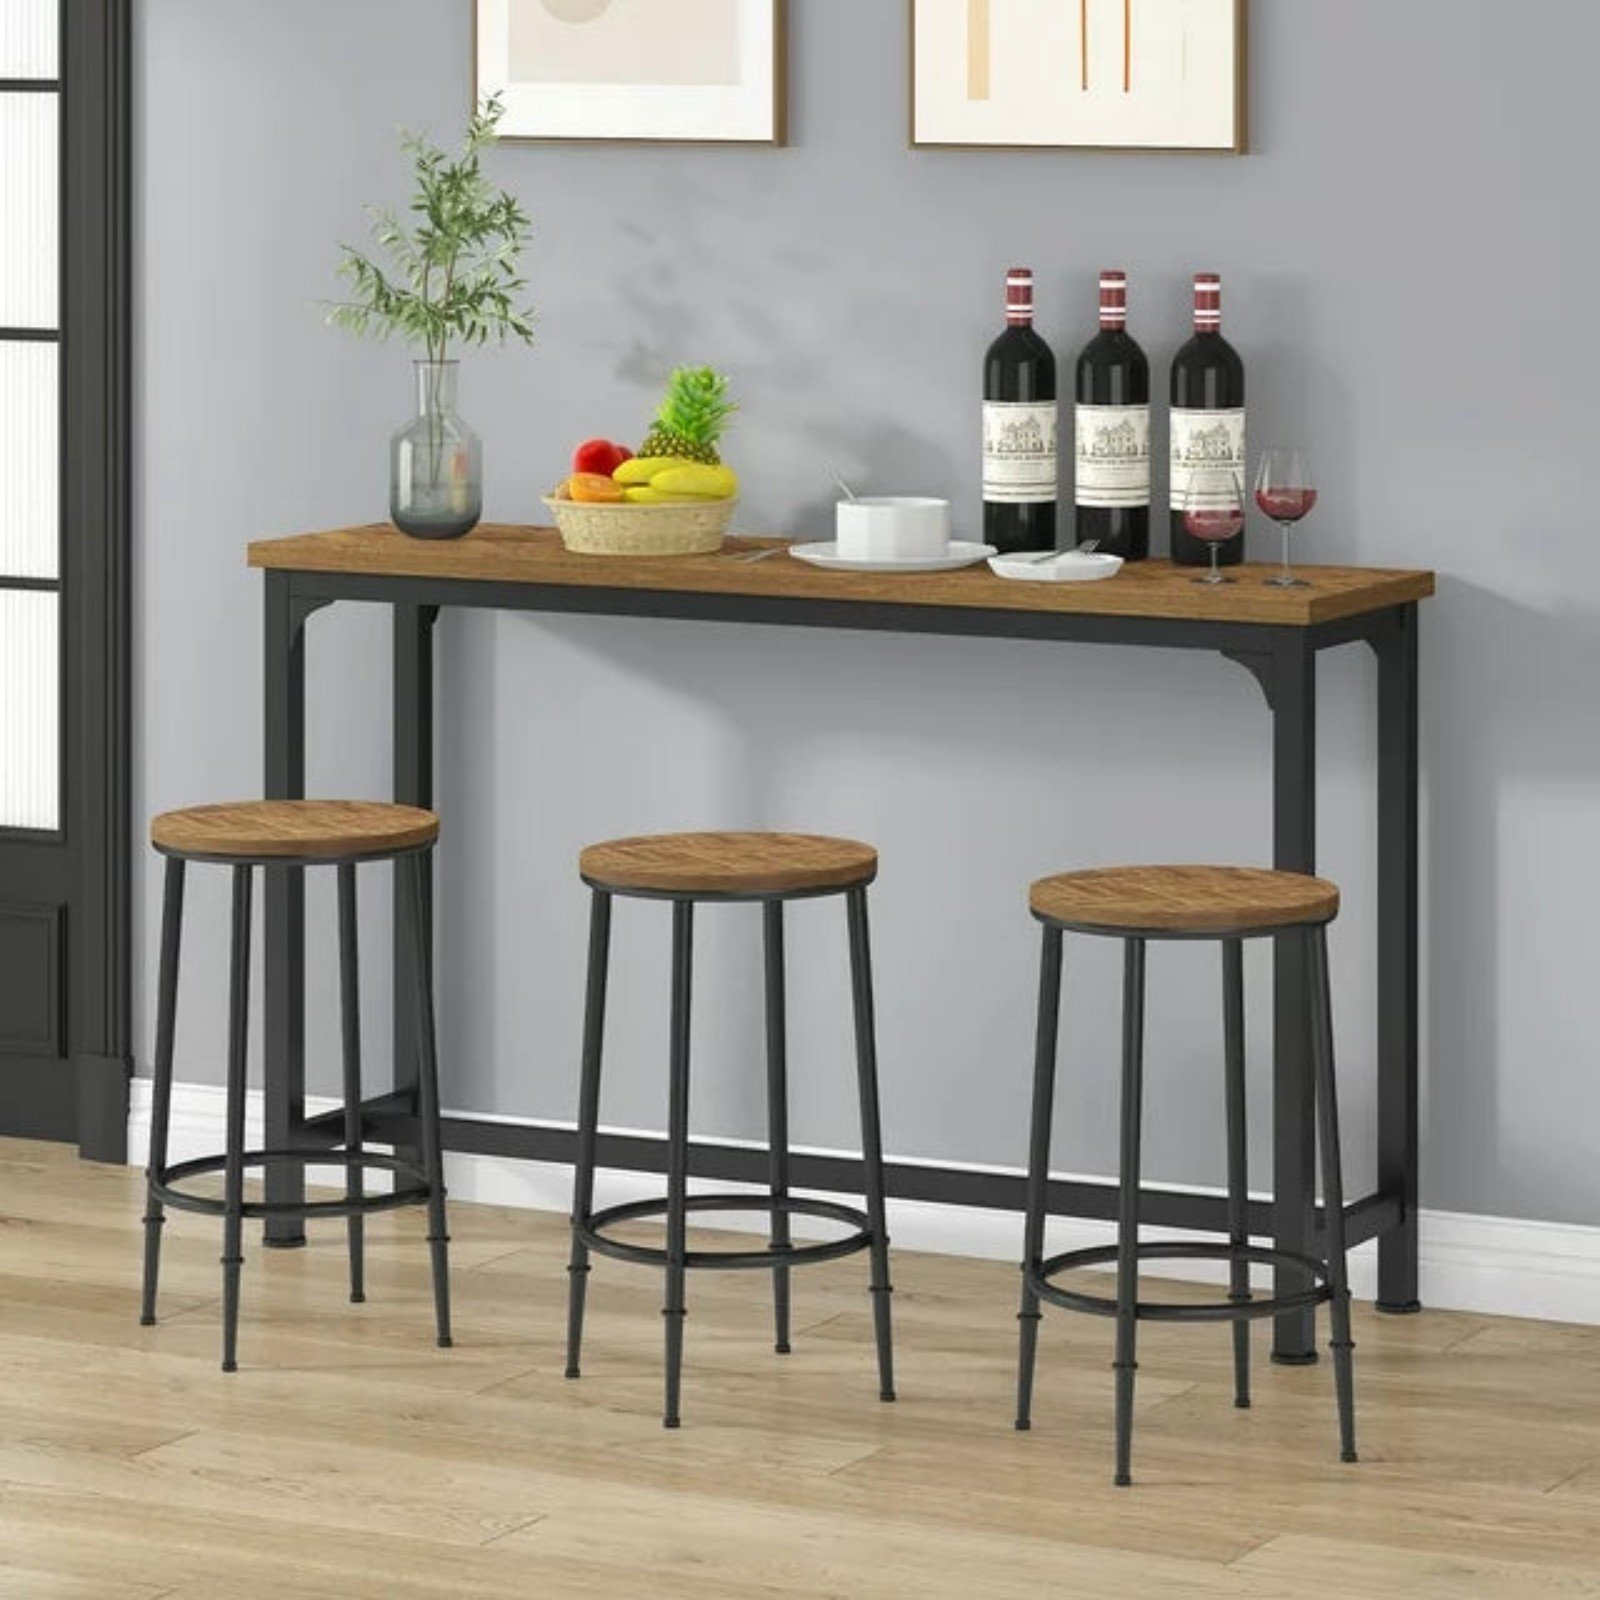 HOMYSHOPY Bar Table Set for 3, Kitchen Counter Height T